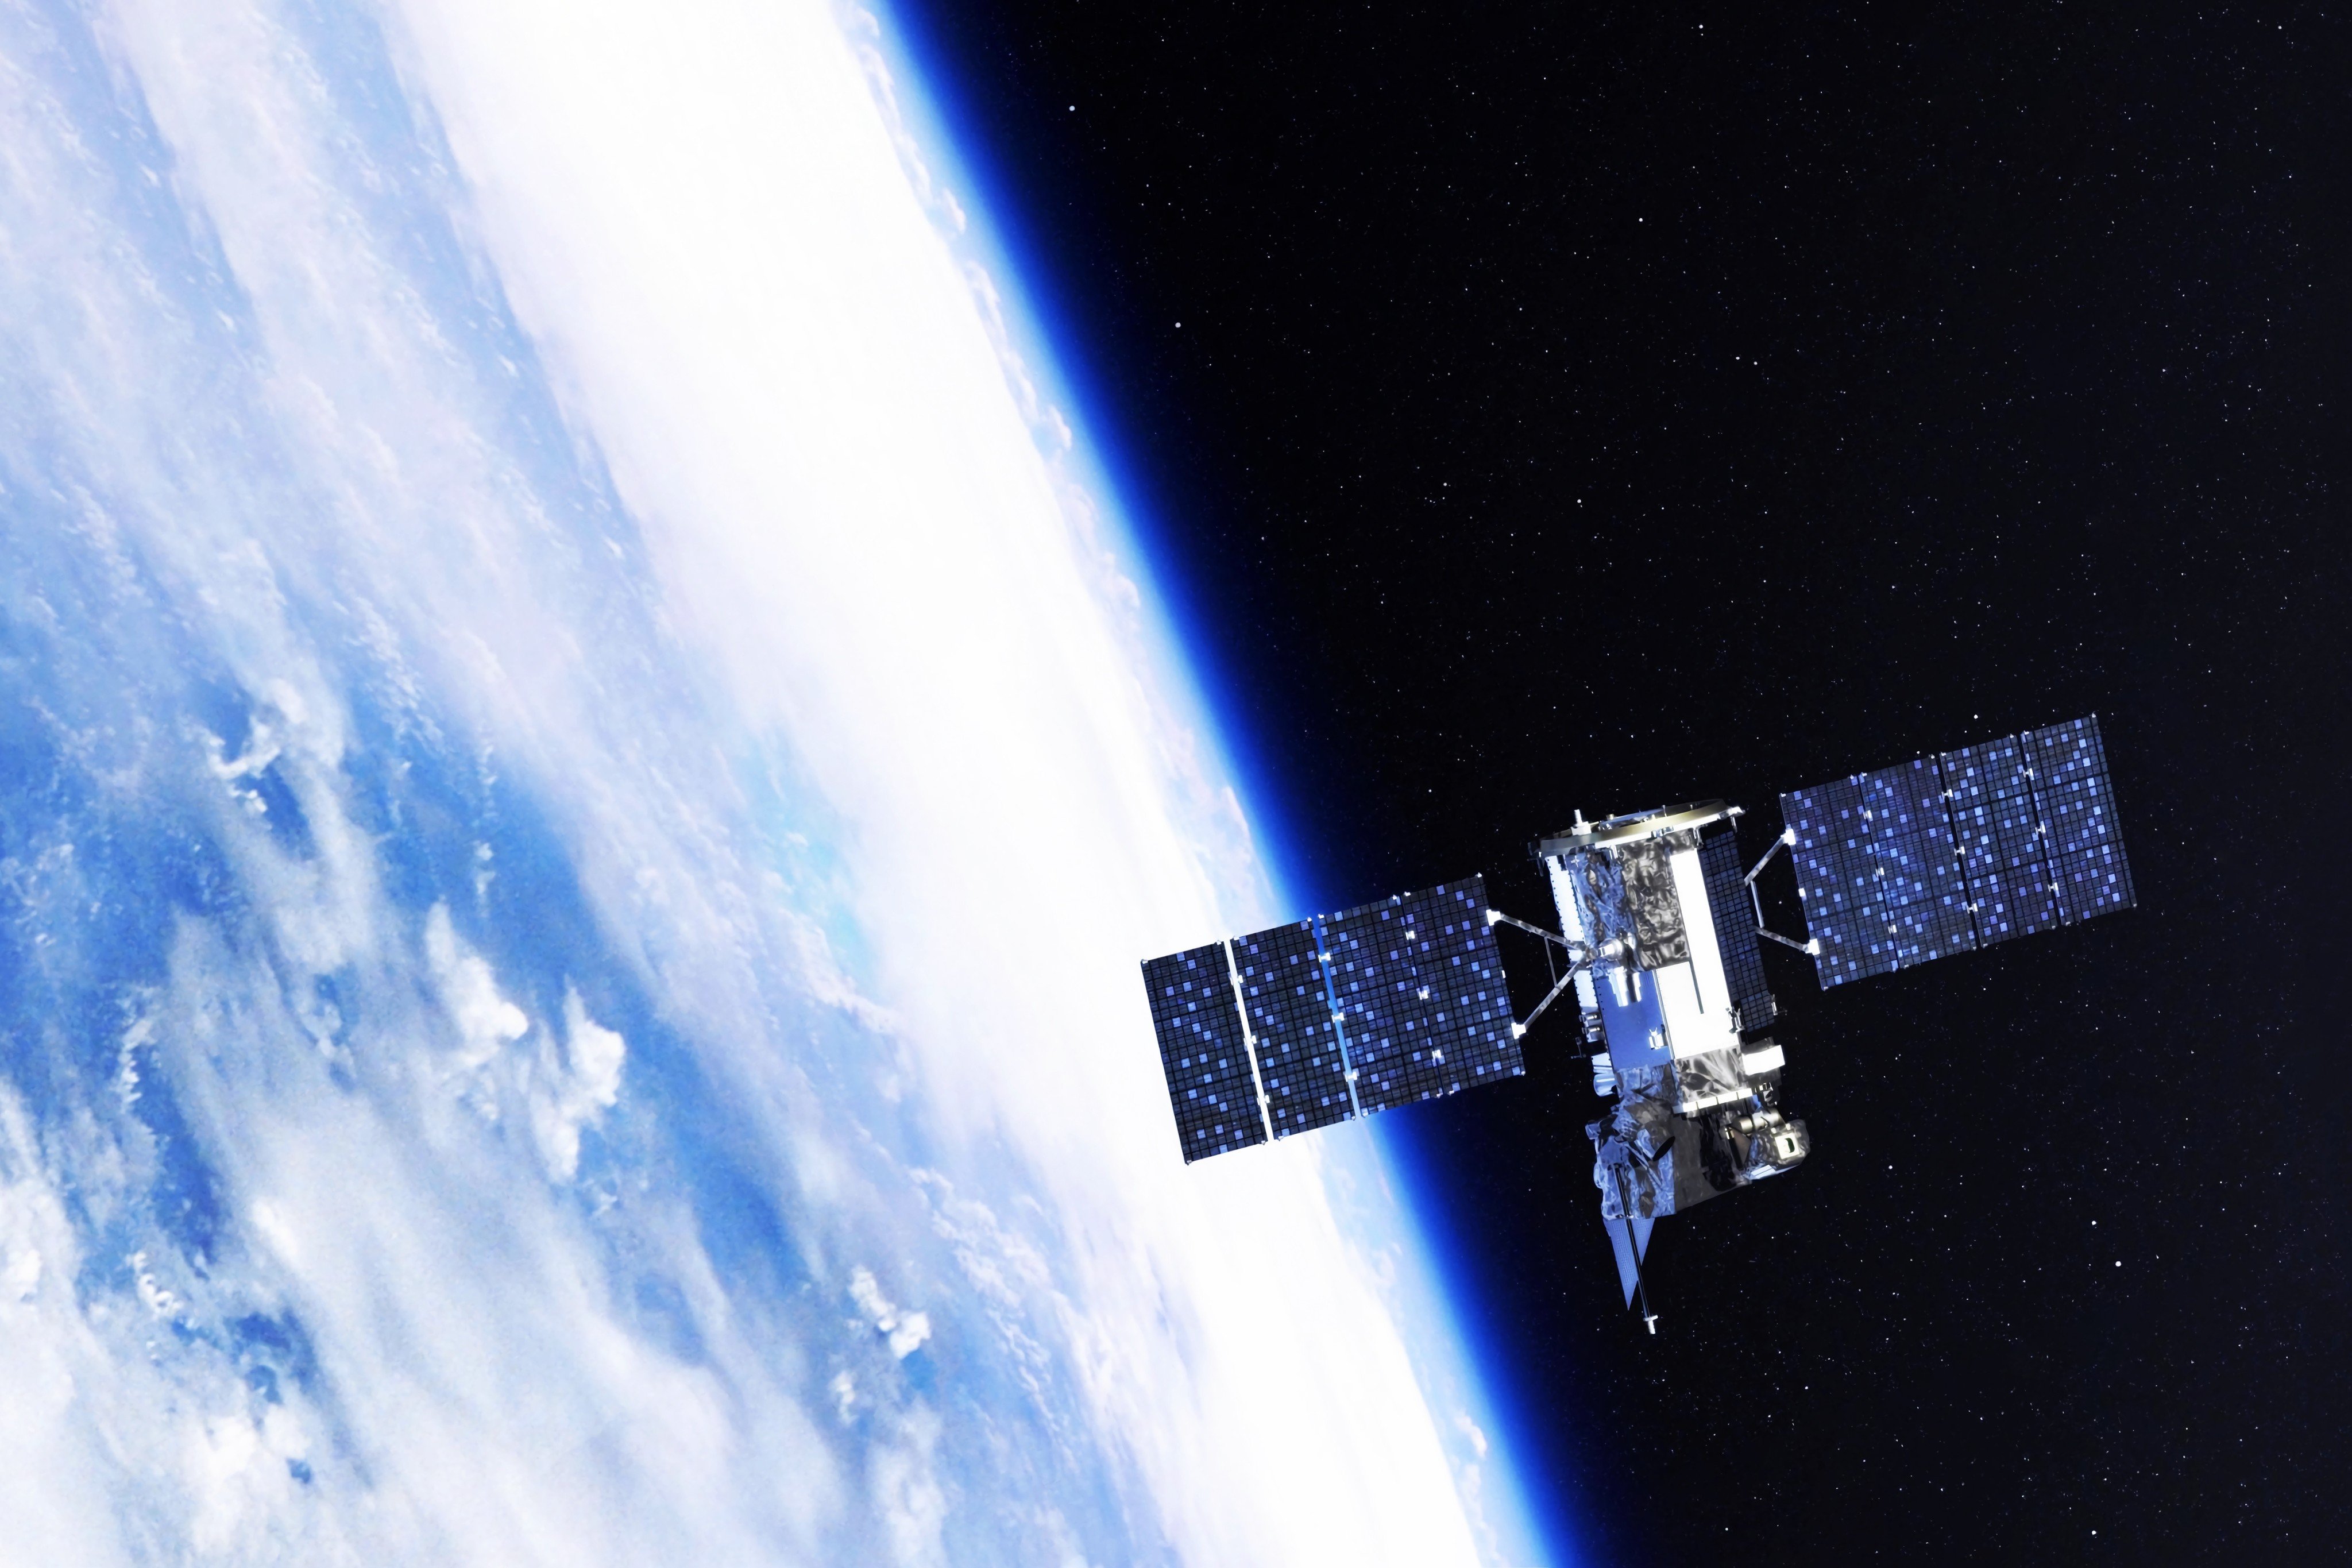 North Korea has switched the transmission of state TV broadcasts to a Russian satellite from a Chinese one, making the monitoring of such broadcasts a challenge for the South’s government agencies and media. Photo: Shutterstock